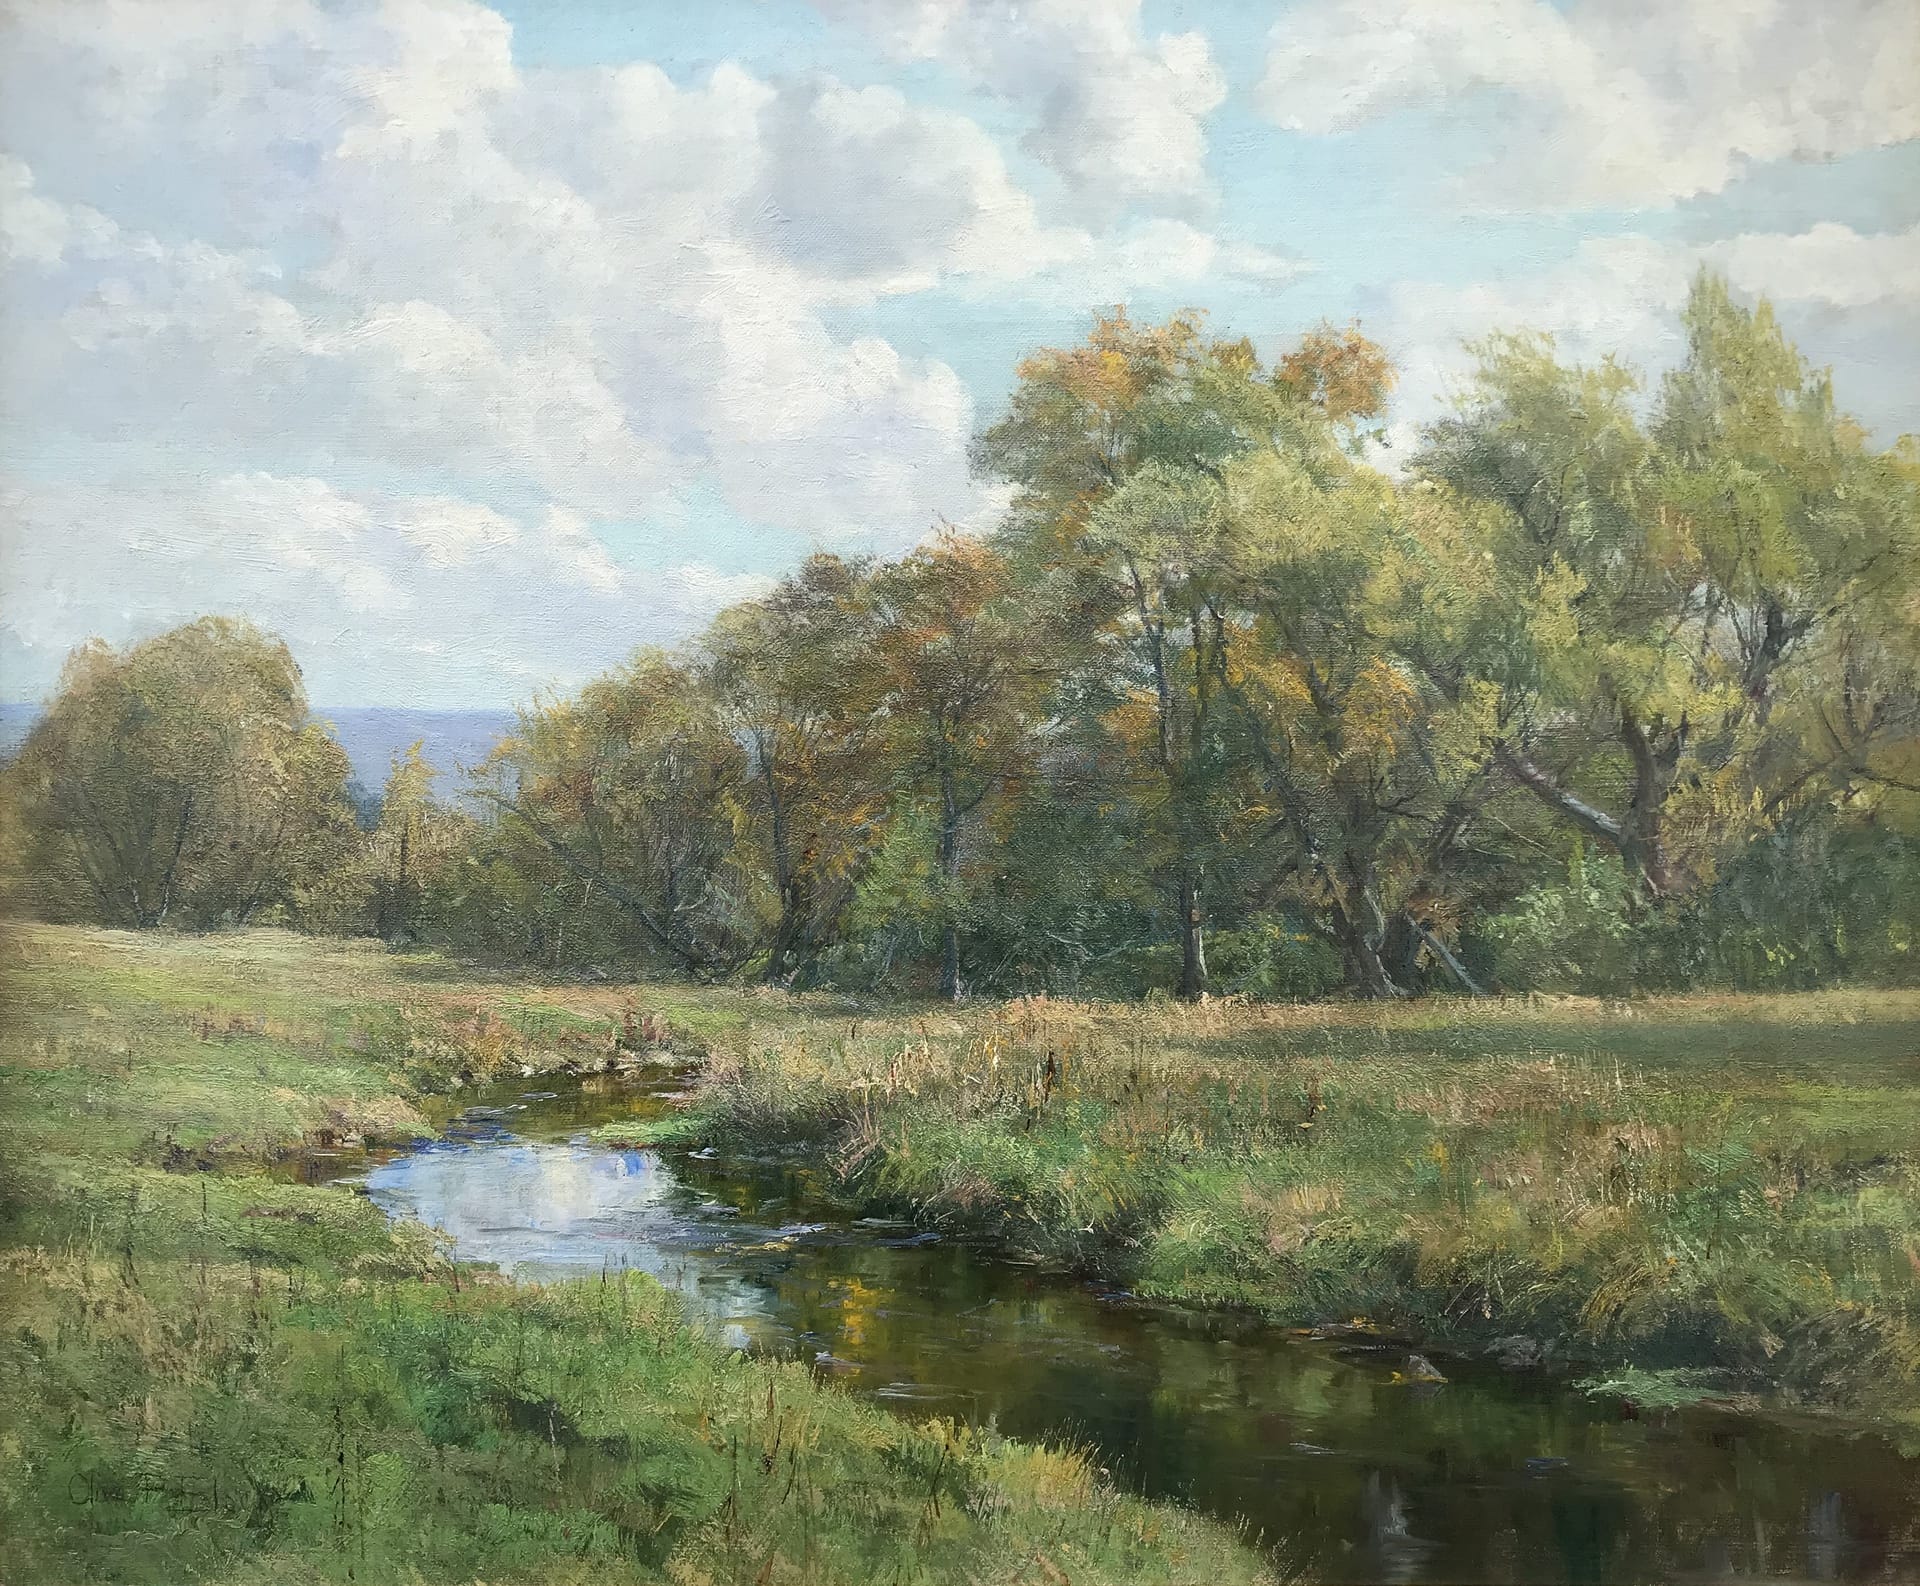 Olive Parker Black's Summer Afternoon. A river winds through a tranquil meadow. Trees grow thickly on the horizon with a cloudy blue sky behind them.